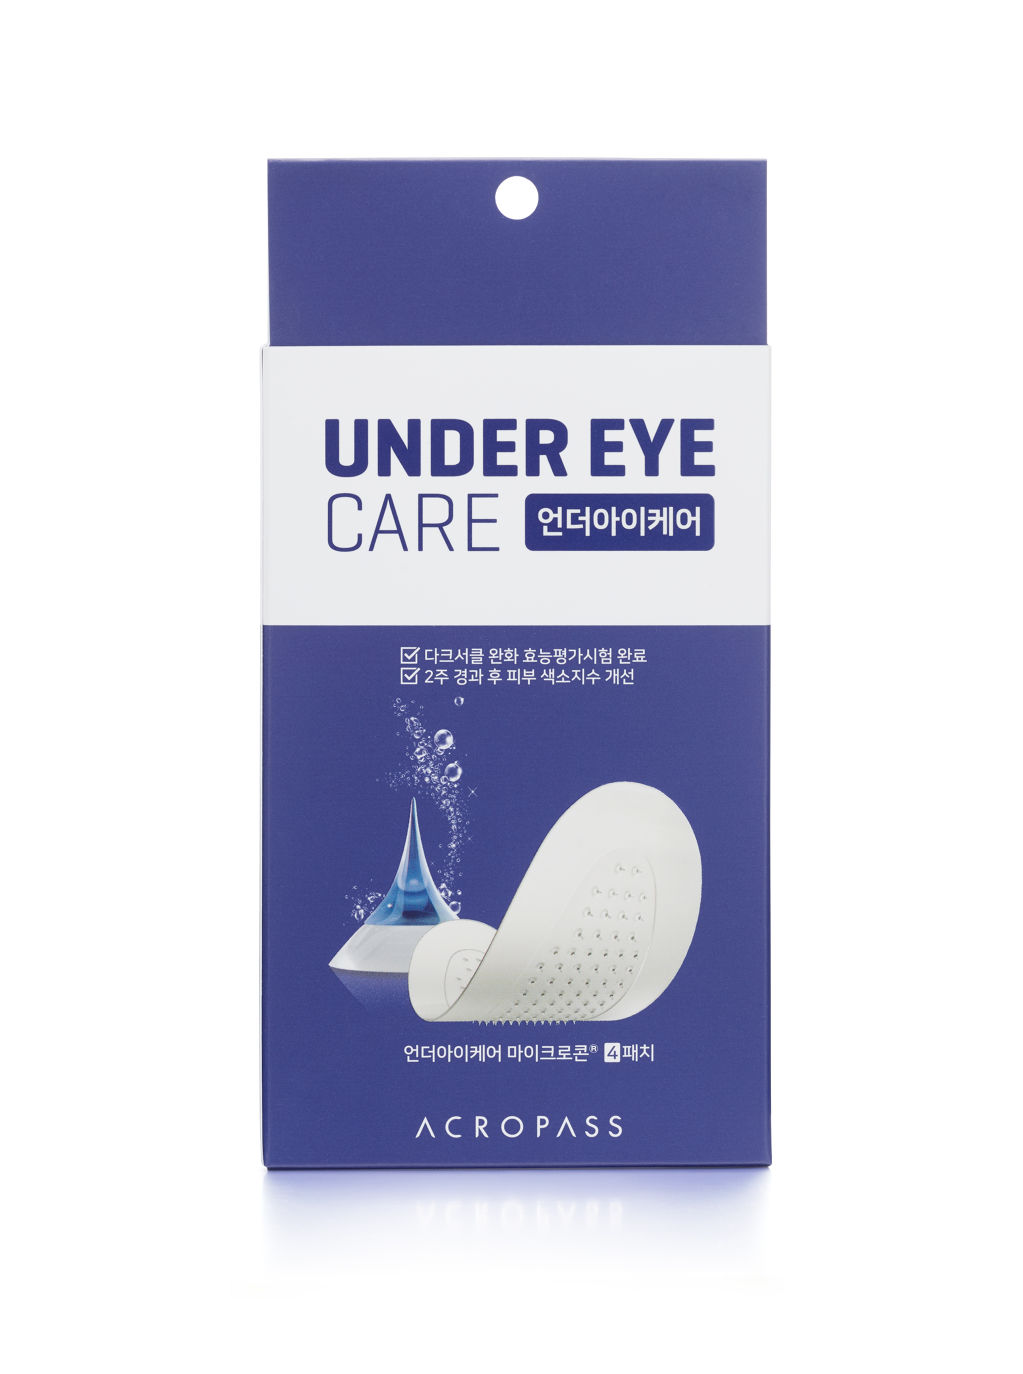 Acropass Under eye Patch - efe14-UNDER-EYE-CARE_Product-Arwork_01.png.jpg